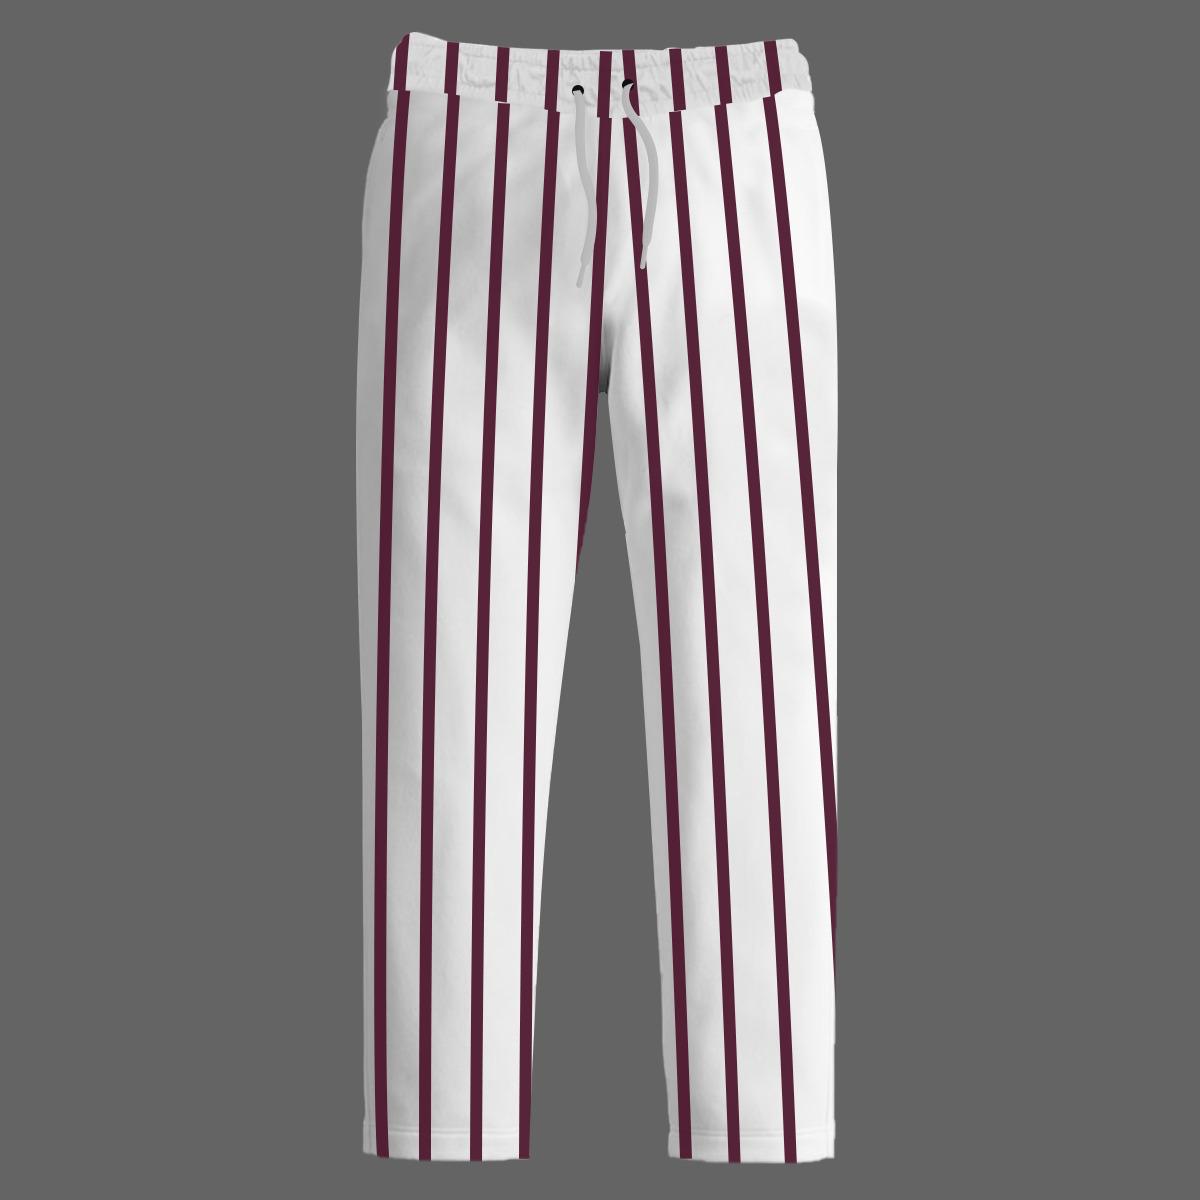 HG Soft Cotton Red Lining Summer Trouser For Men's